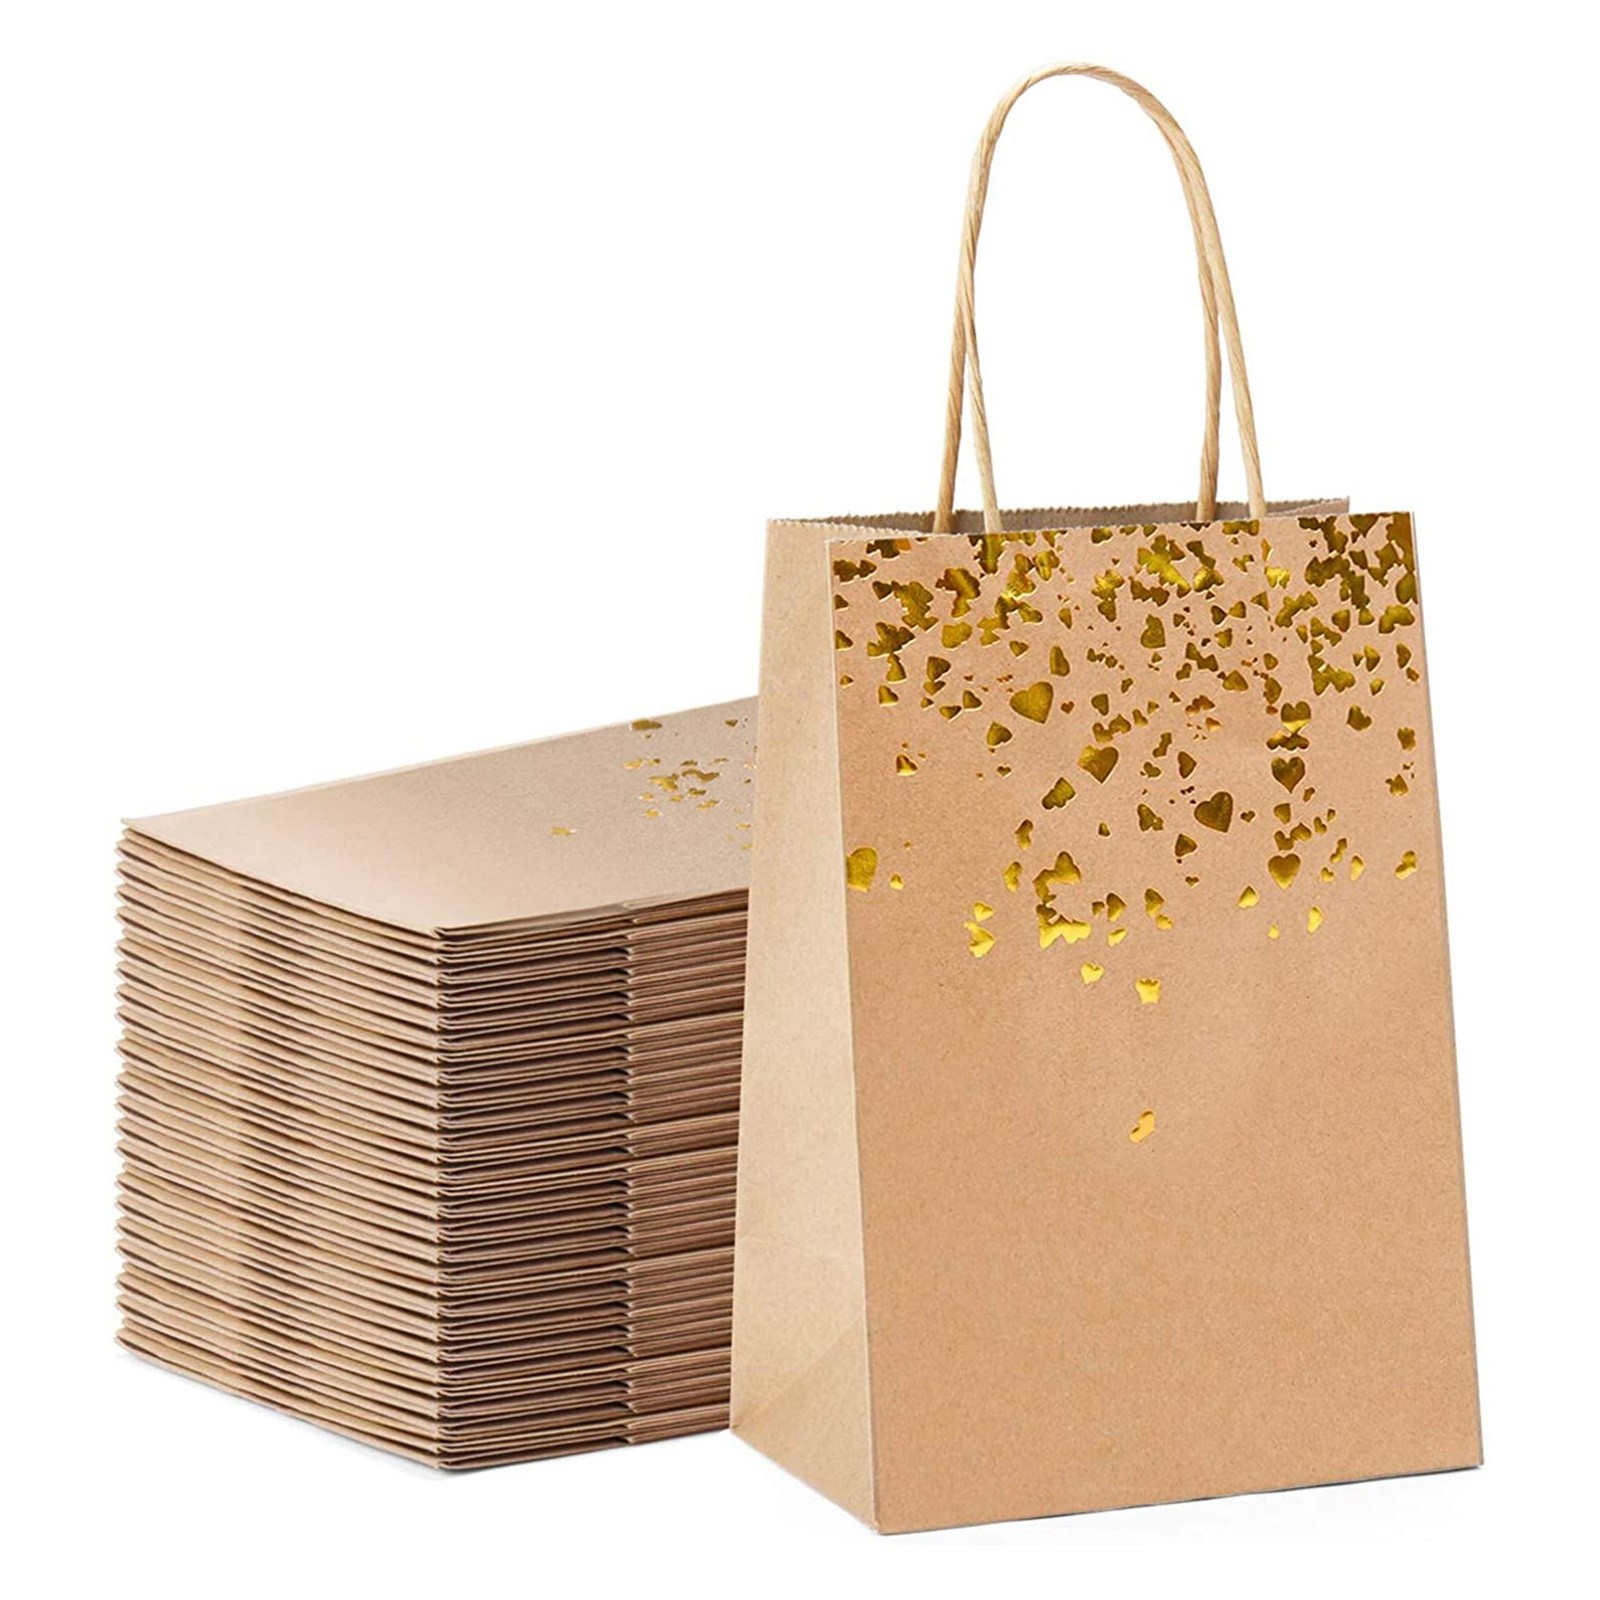 20pcs Heart-shaped Kraft Paper Bag with Handles Solid Color Gift Packing Bags for Store Clothes Wedding Party Supplies Handbags